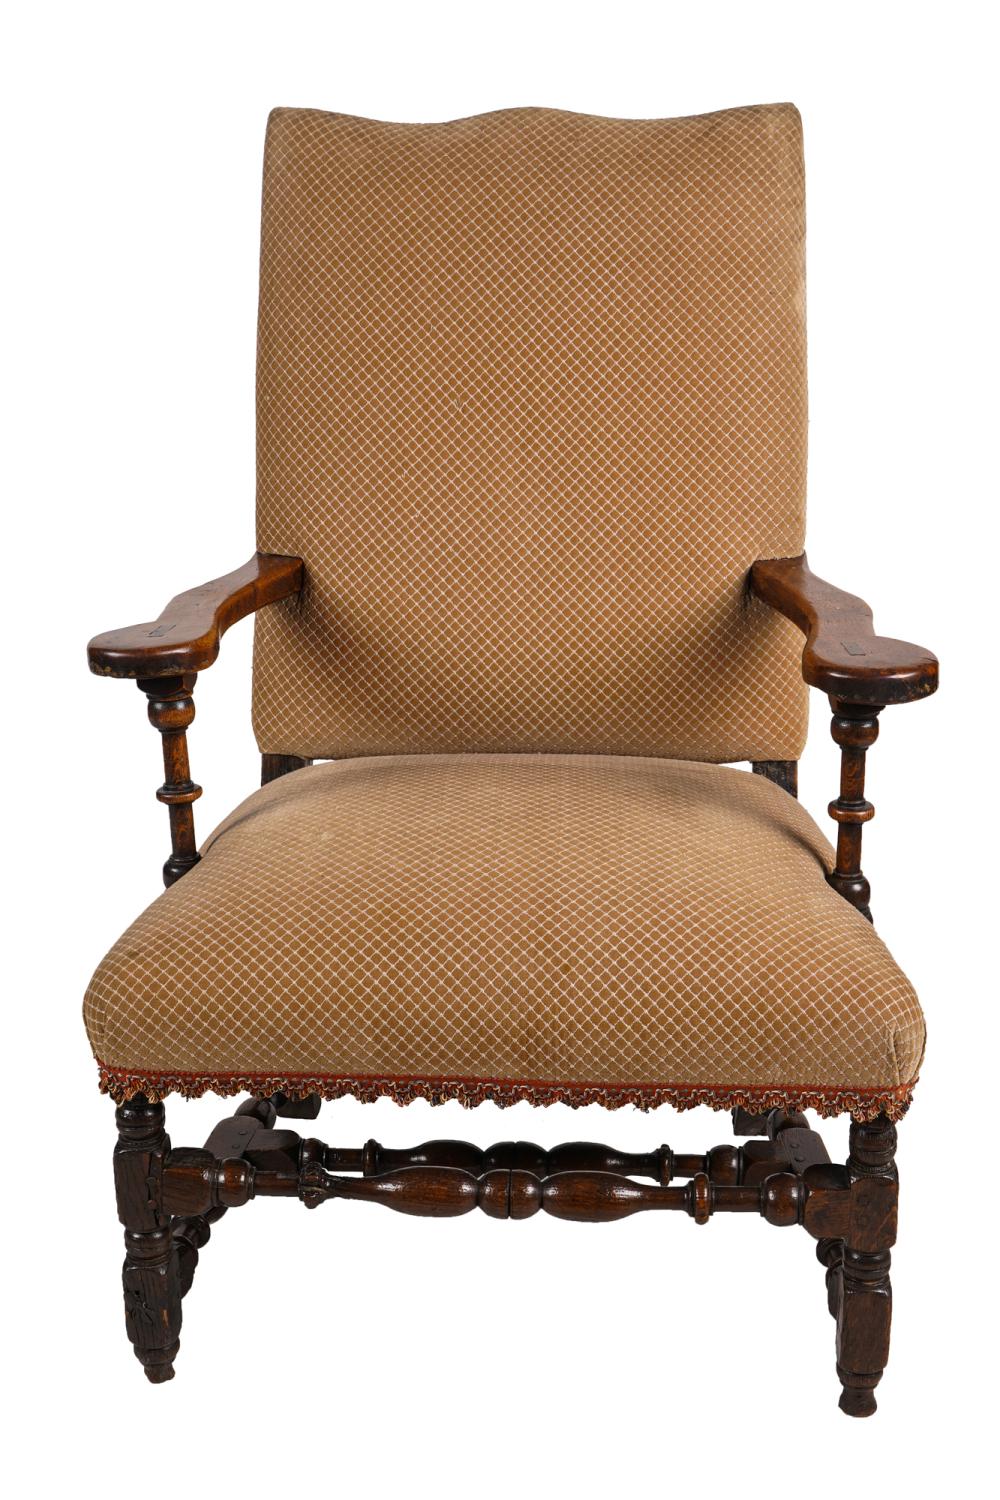 COUNTRY FRENCH FRUITWOOD ARMCHAIR27 336c7e